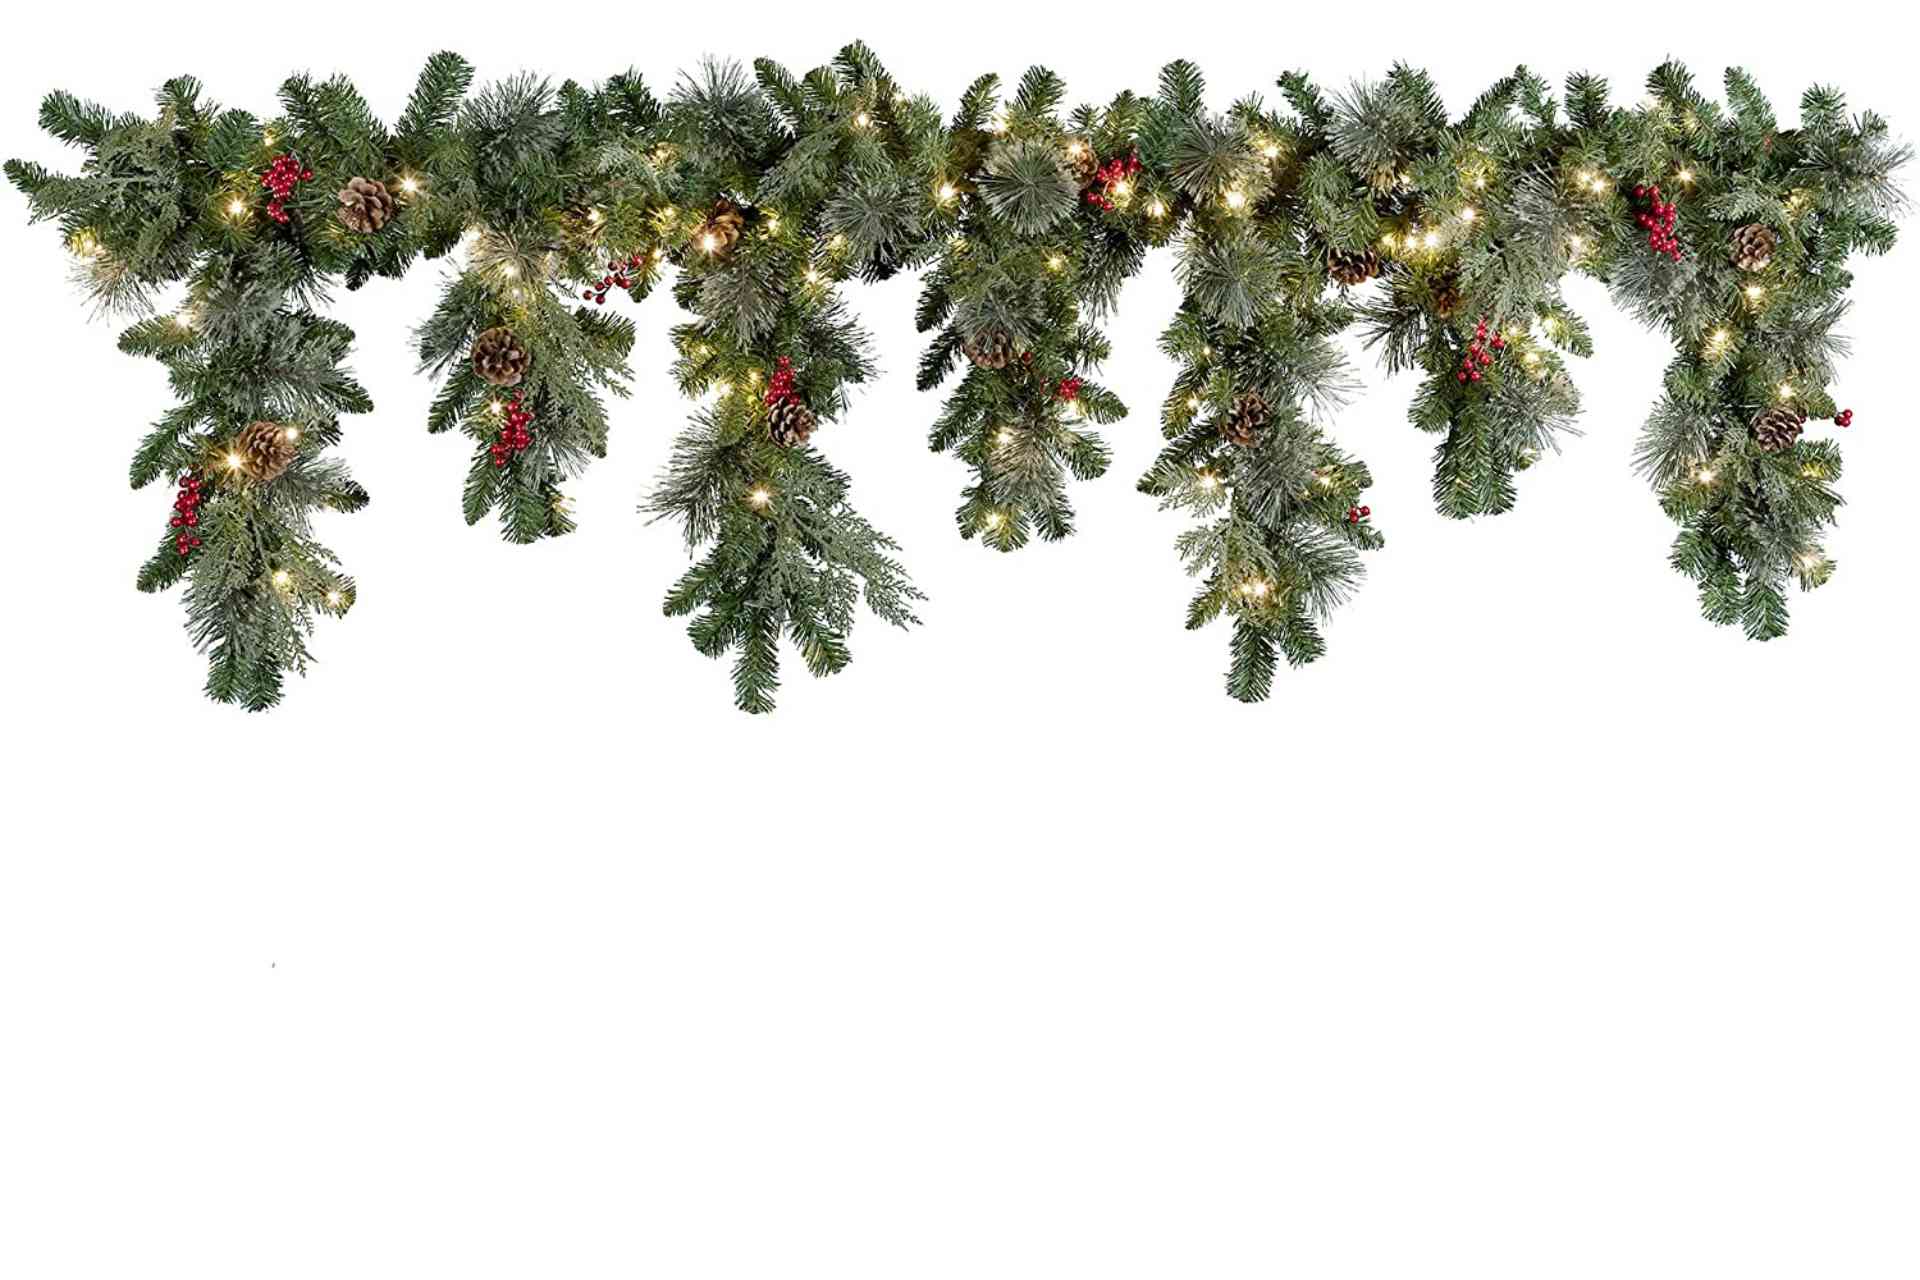 Cascading-Garland-Lights-images-smgs-1-1